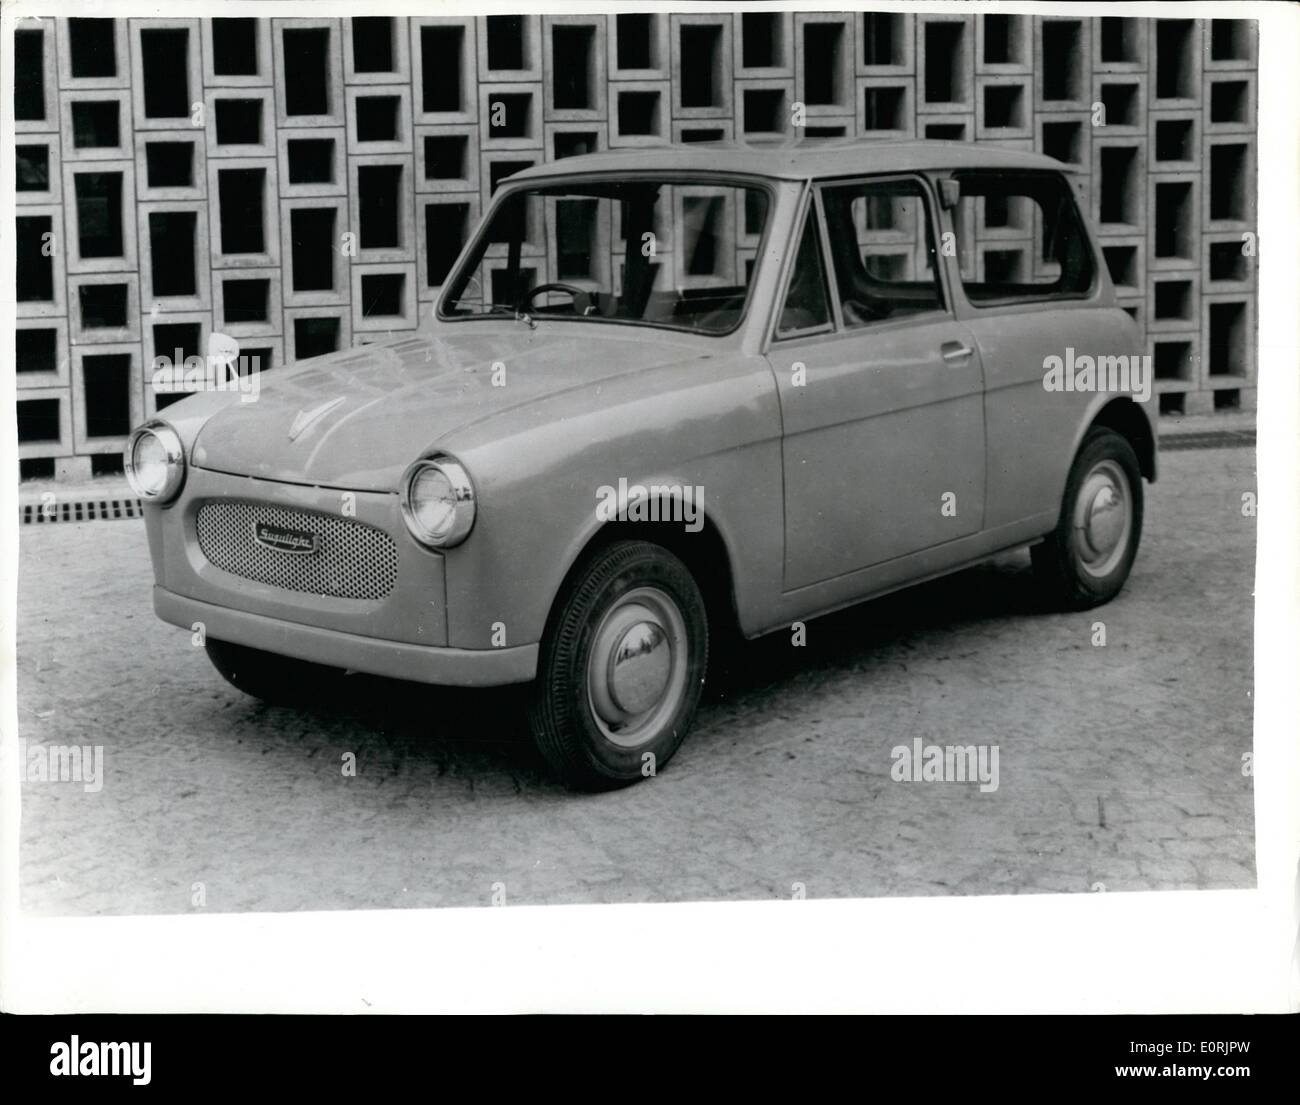 Nov. 30, 1959 - 30-11-59 Introducing the new Japanese People's Car . Another Japanese People's Car is being placed on the foreign market. Known as the Suzulight it is primarily for the U.S. market has top speed of 50 mph with petrol consumption of 50 mpg it is expected to sell in America at about 1,300 dollars. It has a 360 cc two cylinder engine, seats four and weighs 300 kilograms. Stock Photo